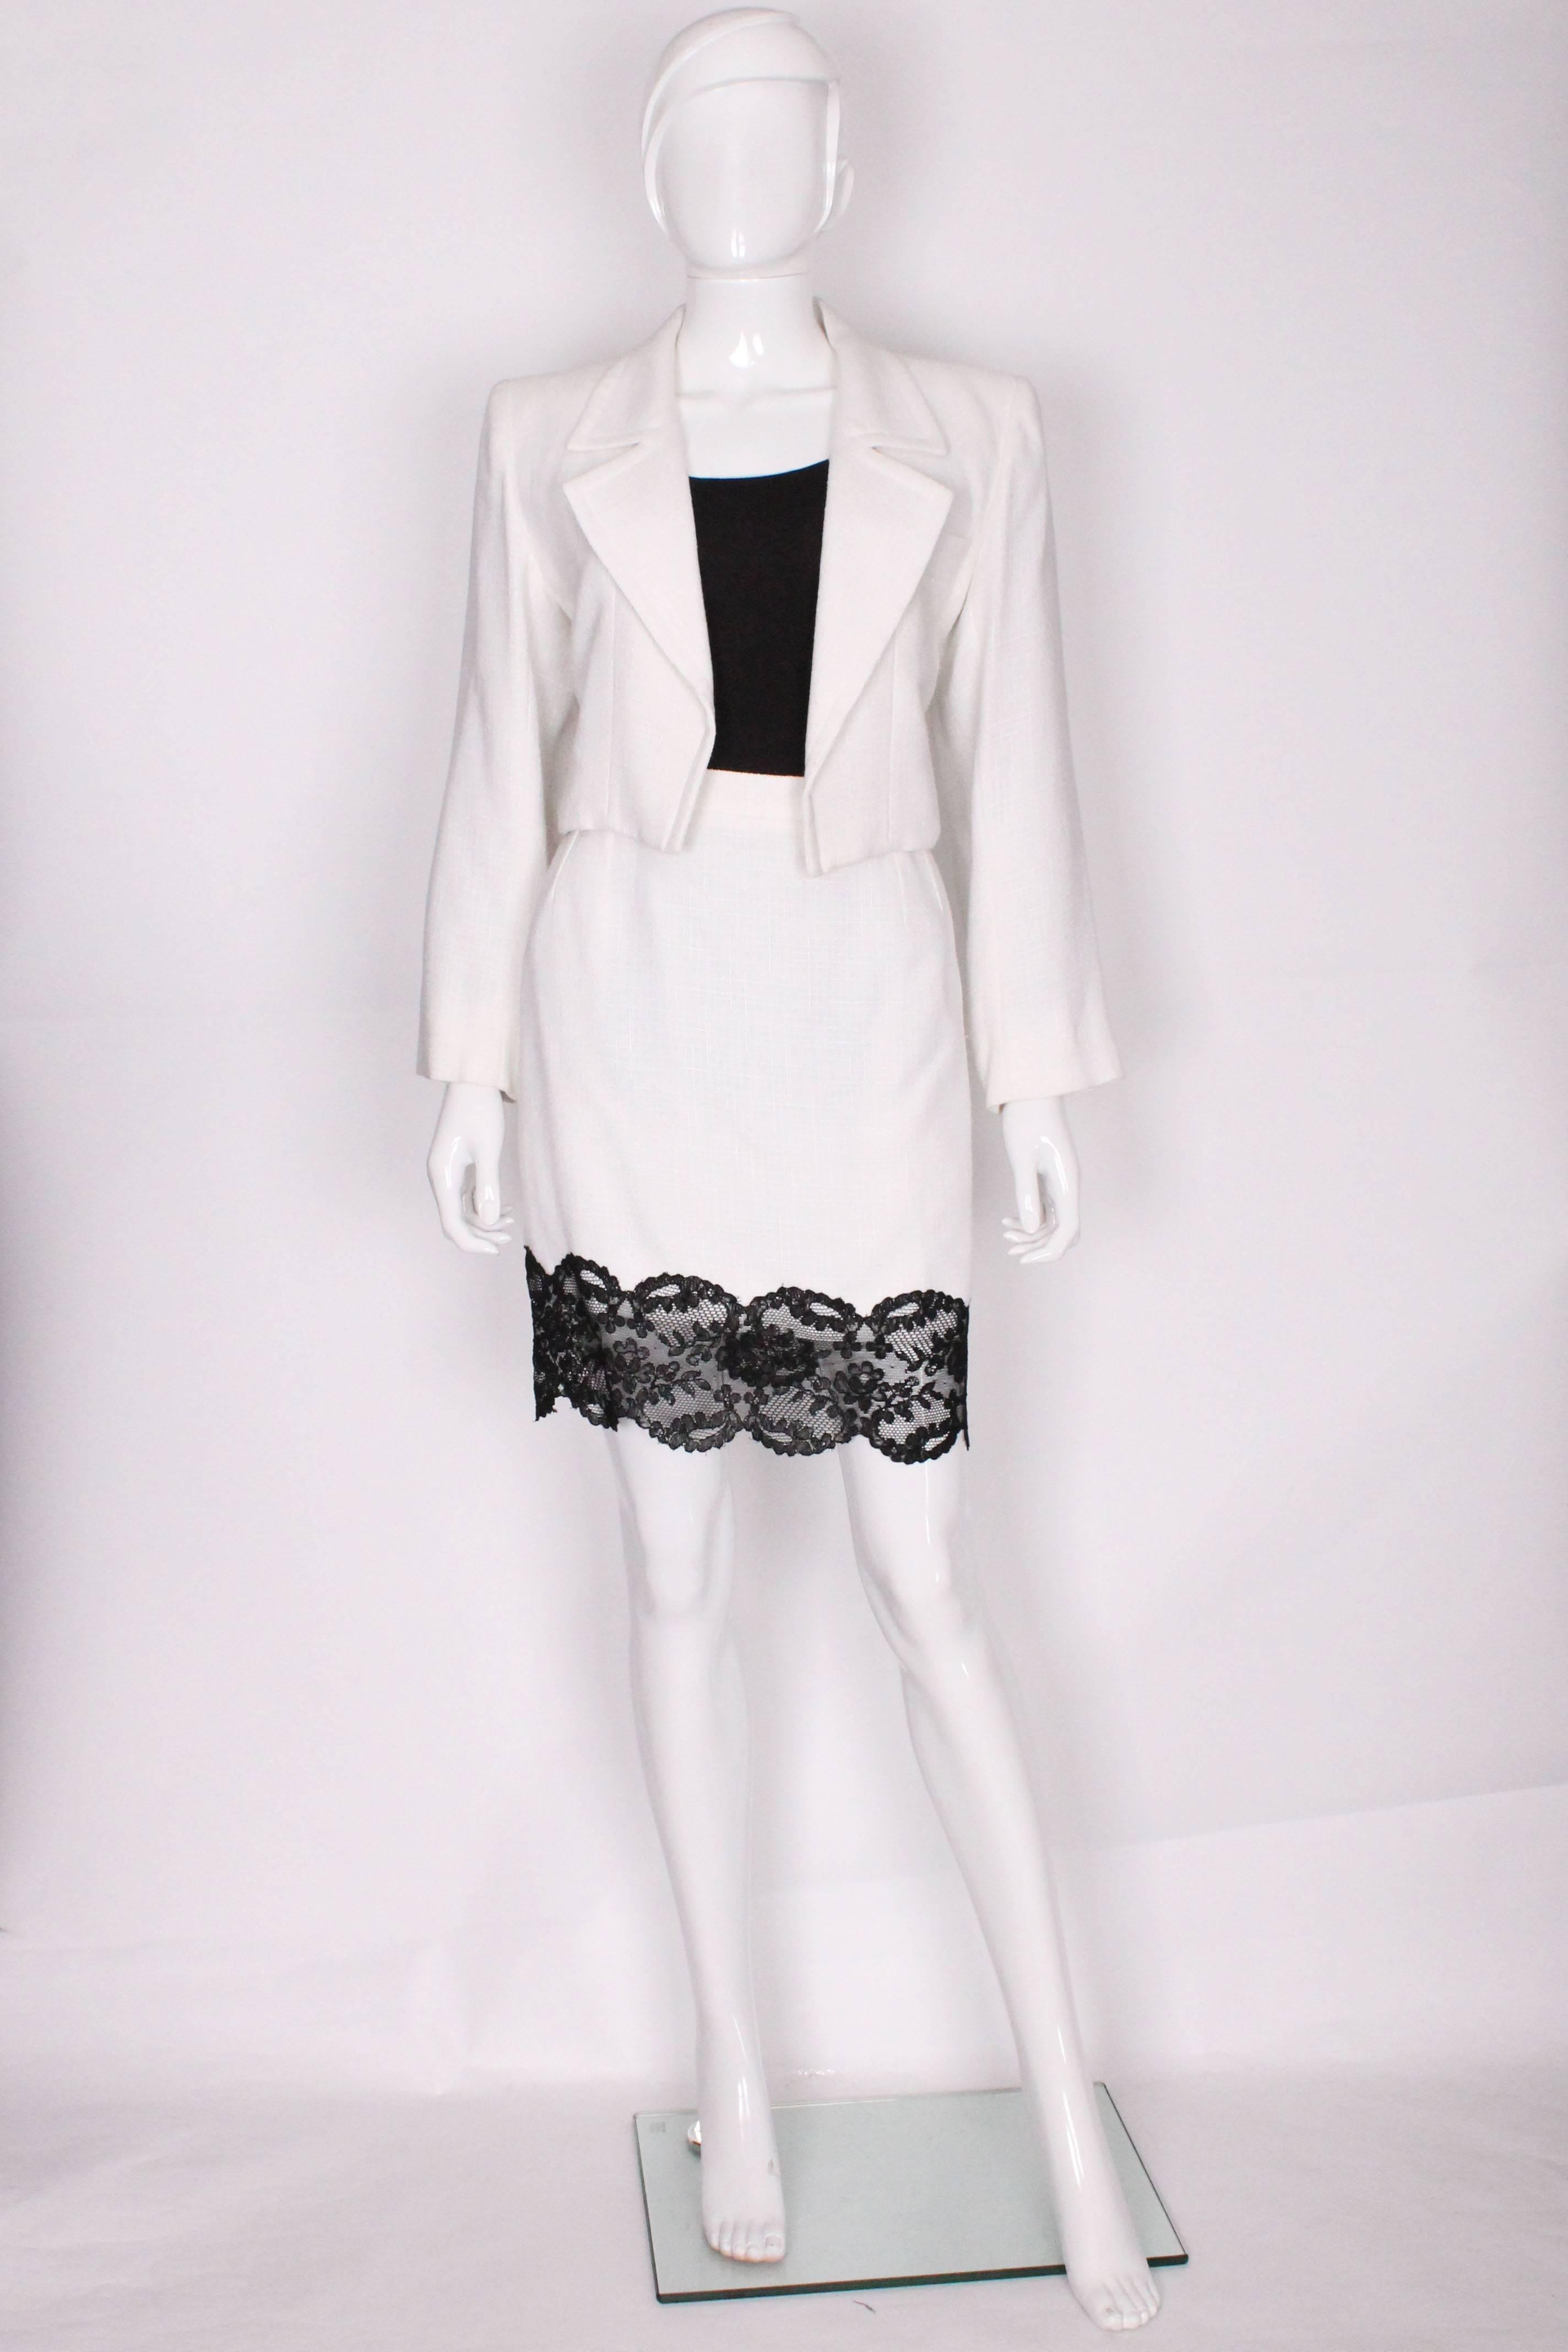 A super suit by French designer Yves Saint Laurent. The cropped jacket is tuxedo style with a pocket on the left breast. The short skirt is edged with black lace and has a side zip and pocket on the left hand side.
The jacket is a size 40 , bust